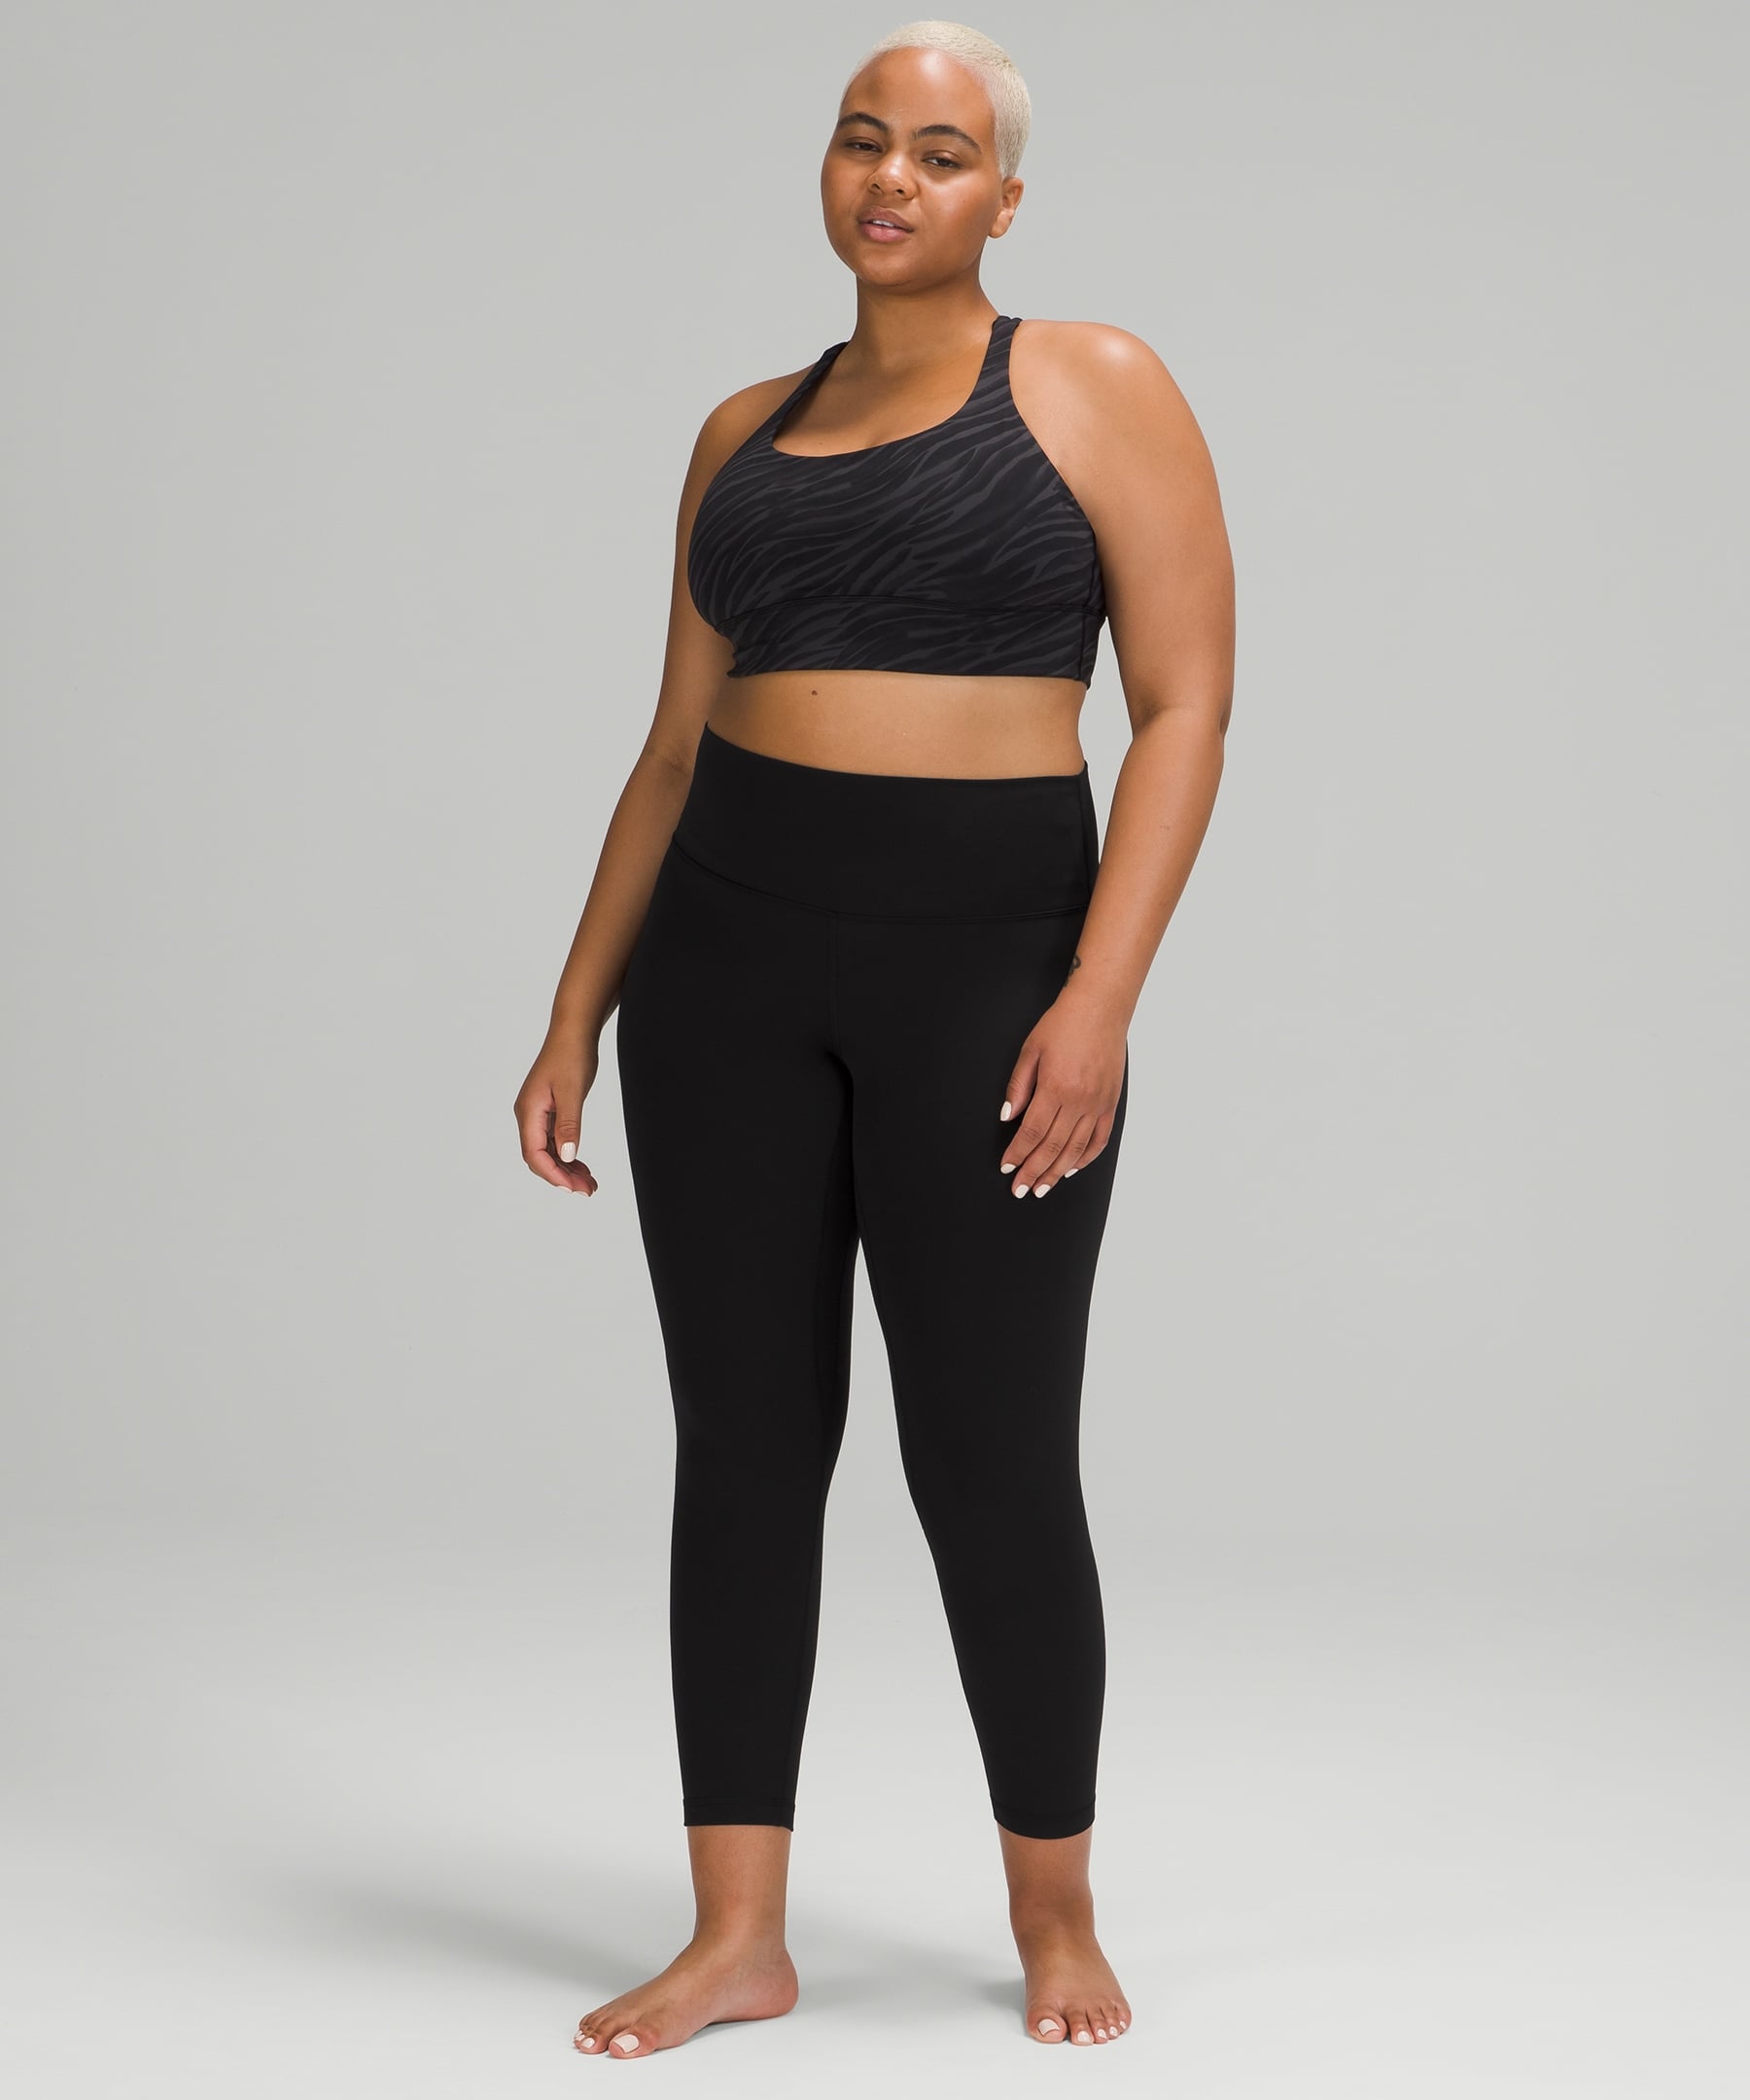 Best Overall Lululemon Leggings: Lululemon Align Pant II | We Compared 11  of the Best Lululemon Leggings So You Know Exactly What You're Buying |  POPSUGAR Fitness Photo 2